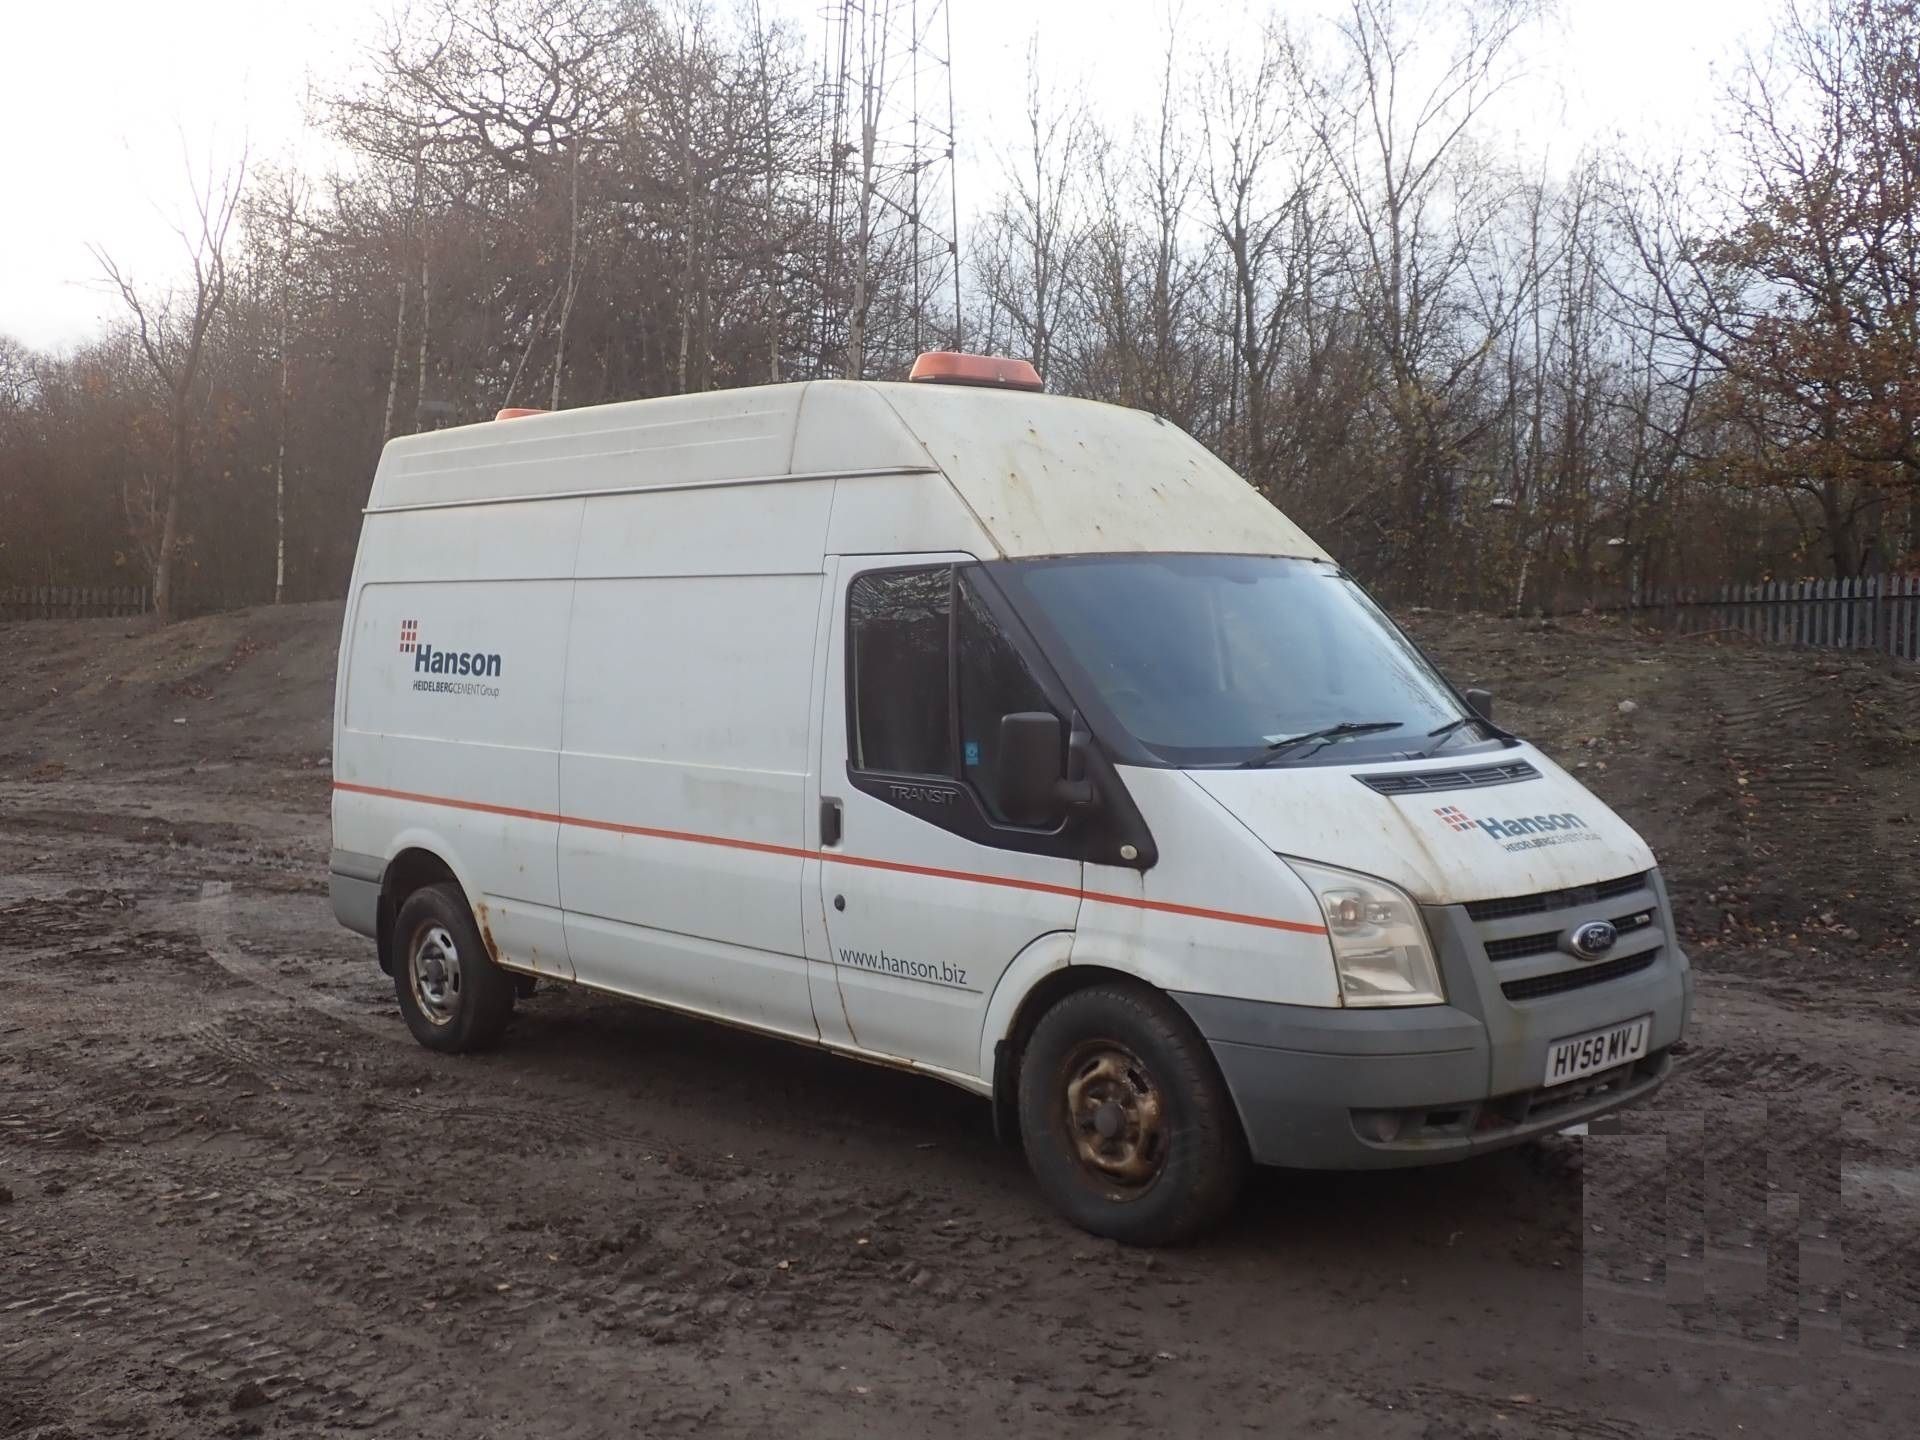 2008 Ford Transit 350 LWB 115 RWD 5 Door Panel Van - CL505 - Location: Corby, Northamptonshire - Image 11 of 12